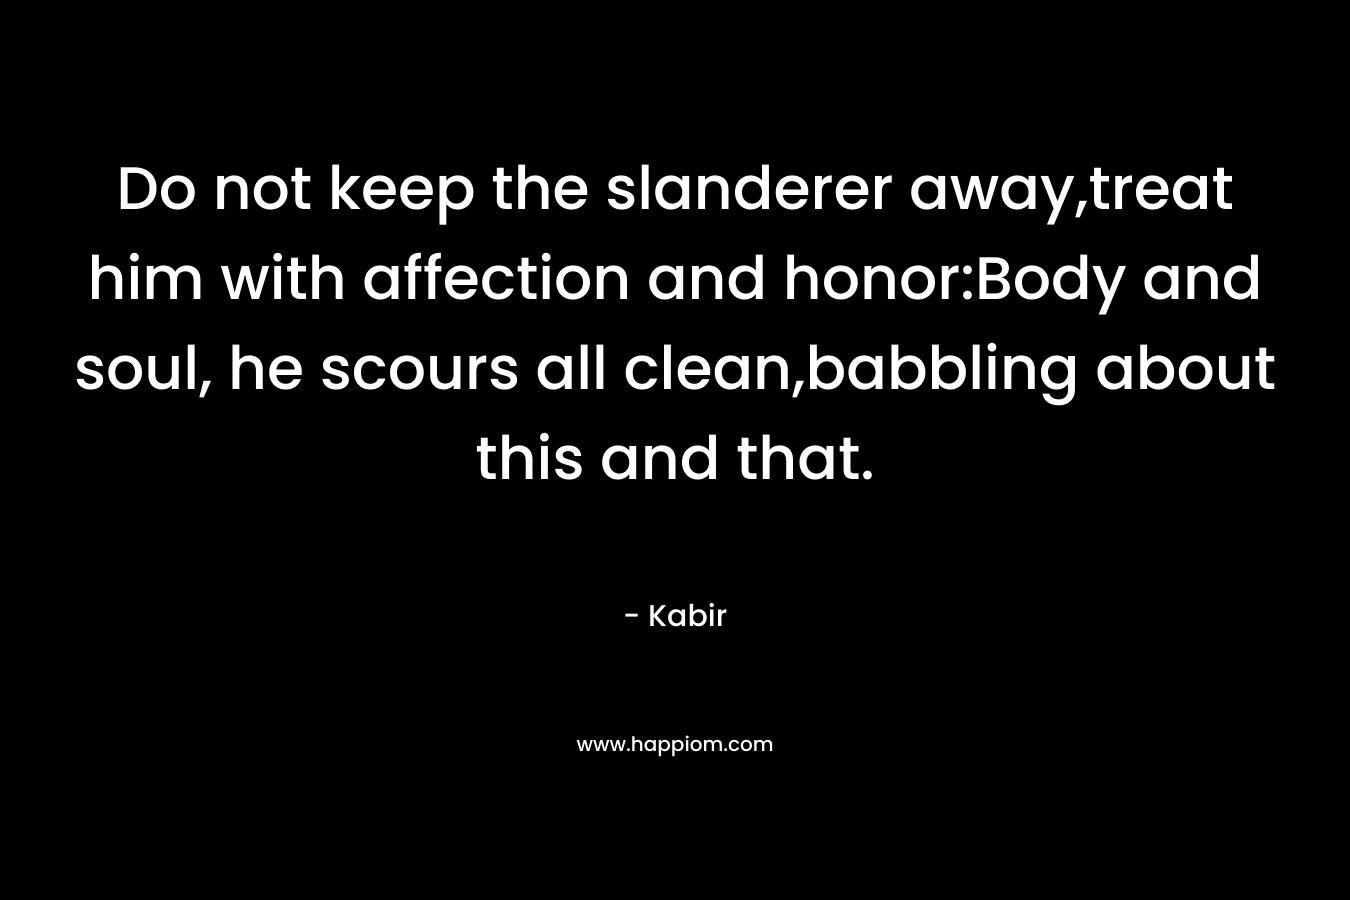 Do not keep the slanderer away,treat him with affection and honor:Body and soul, he scours all clean,babbling about this and that. – Kabir